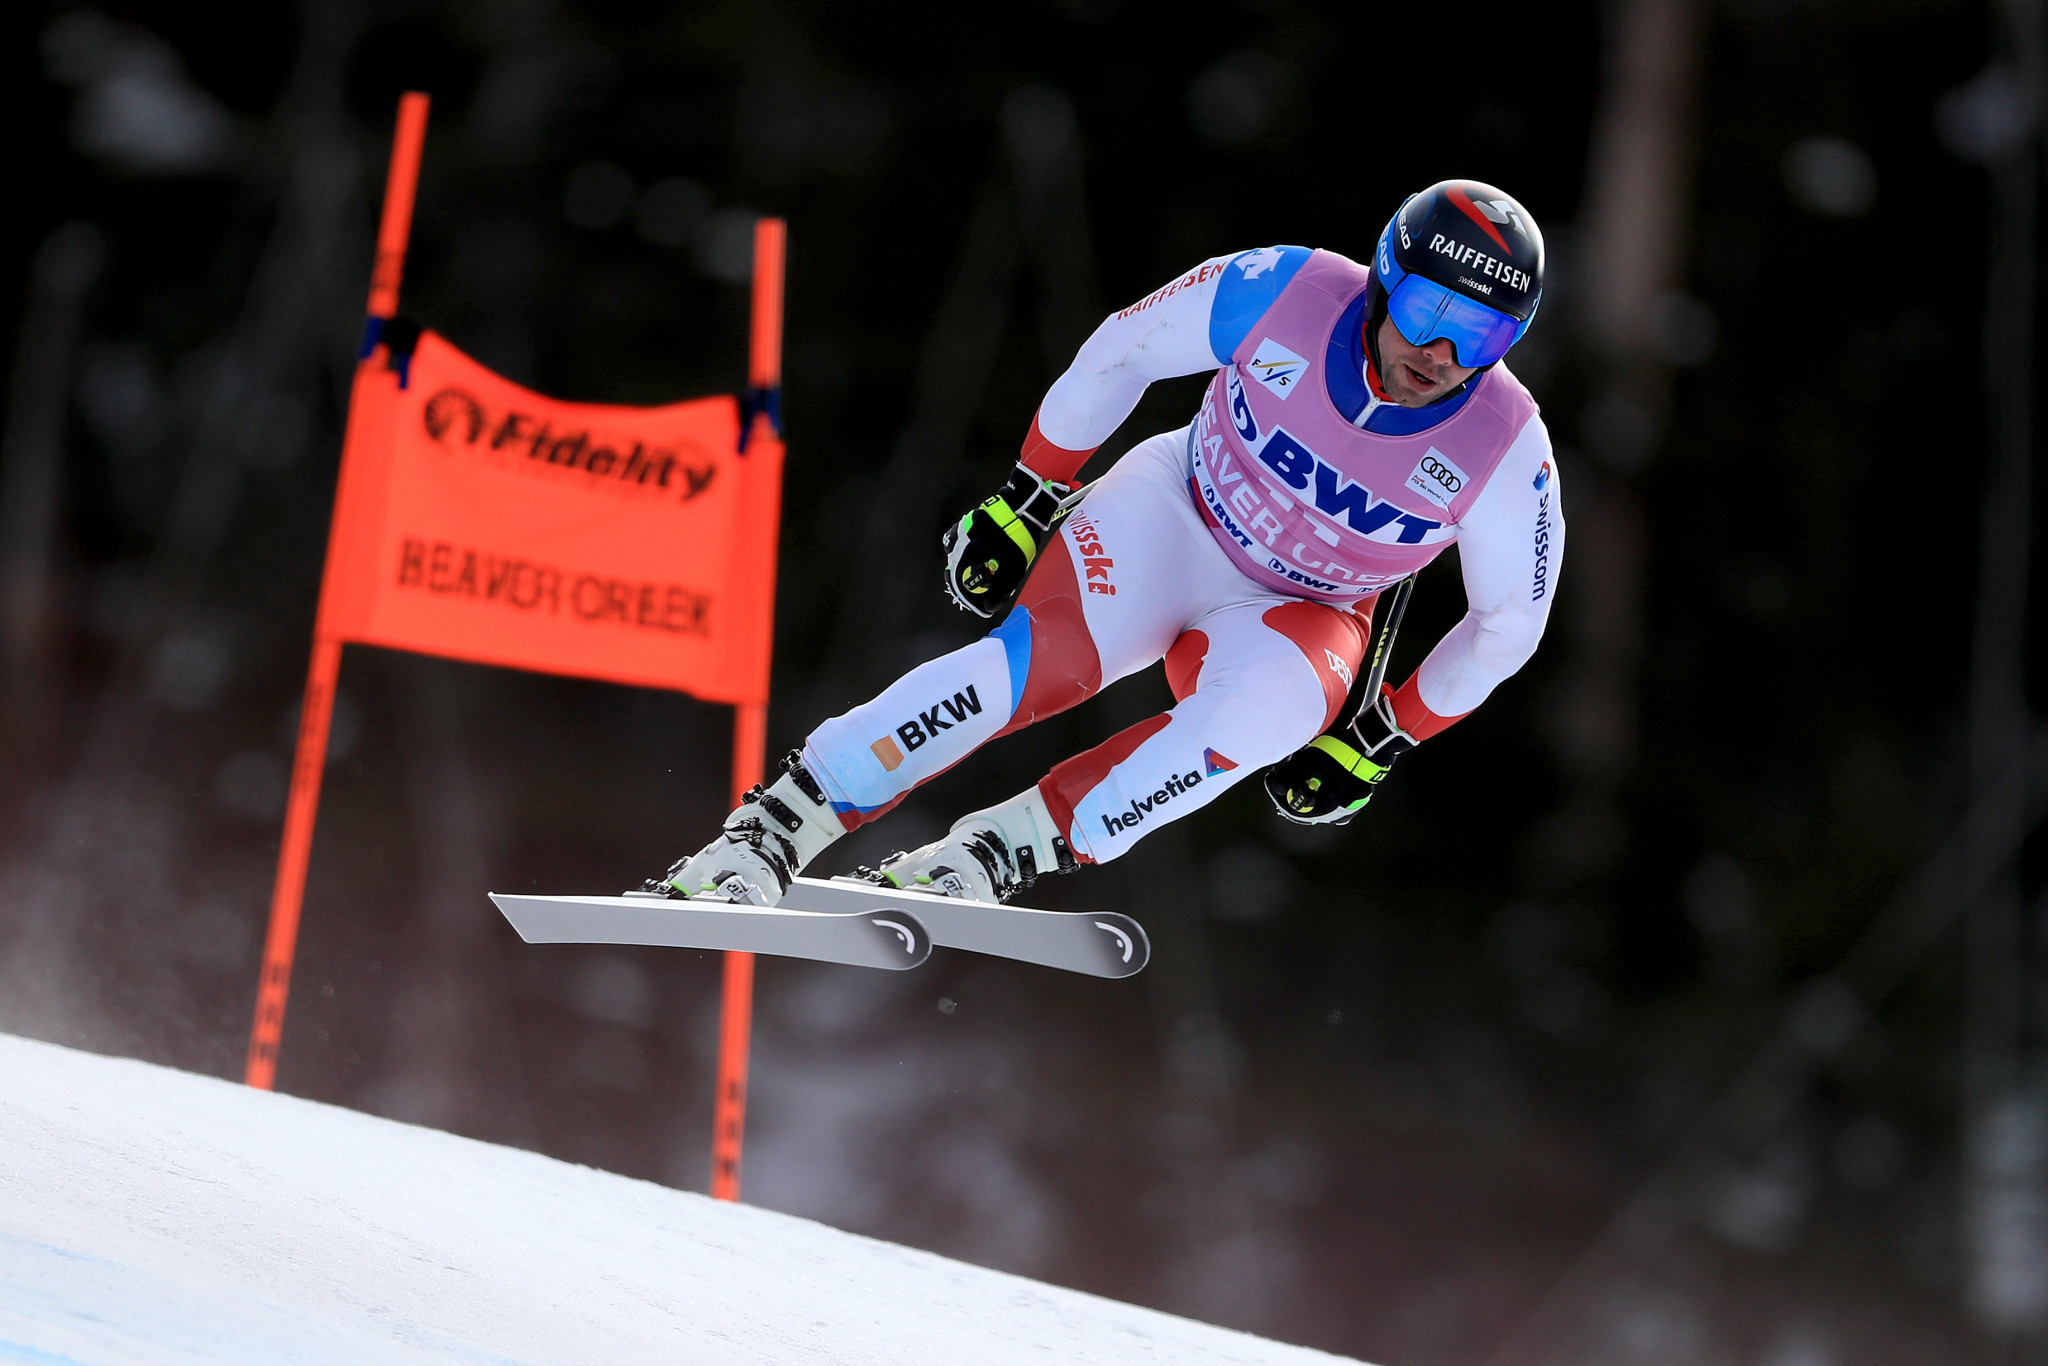 Beat Feuz of Switzerland is considered one of the favourites in the downhill competition ©Getty Images